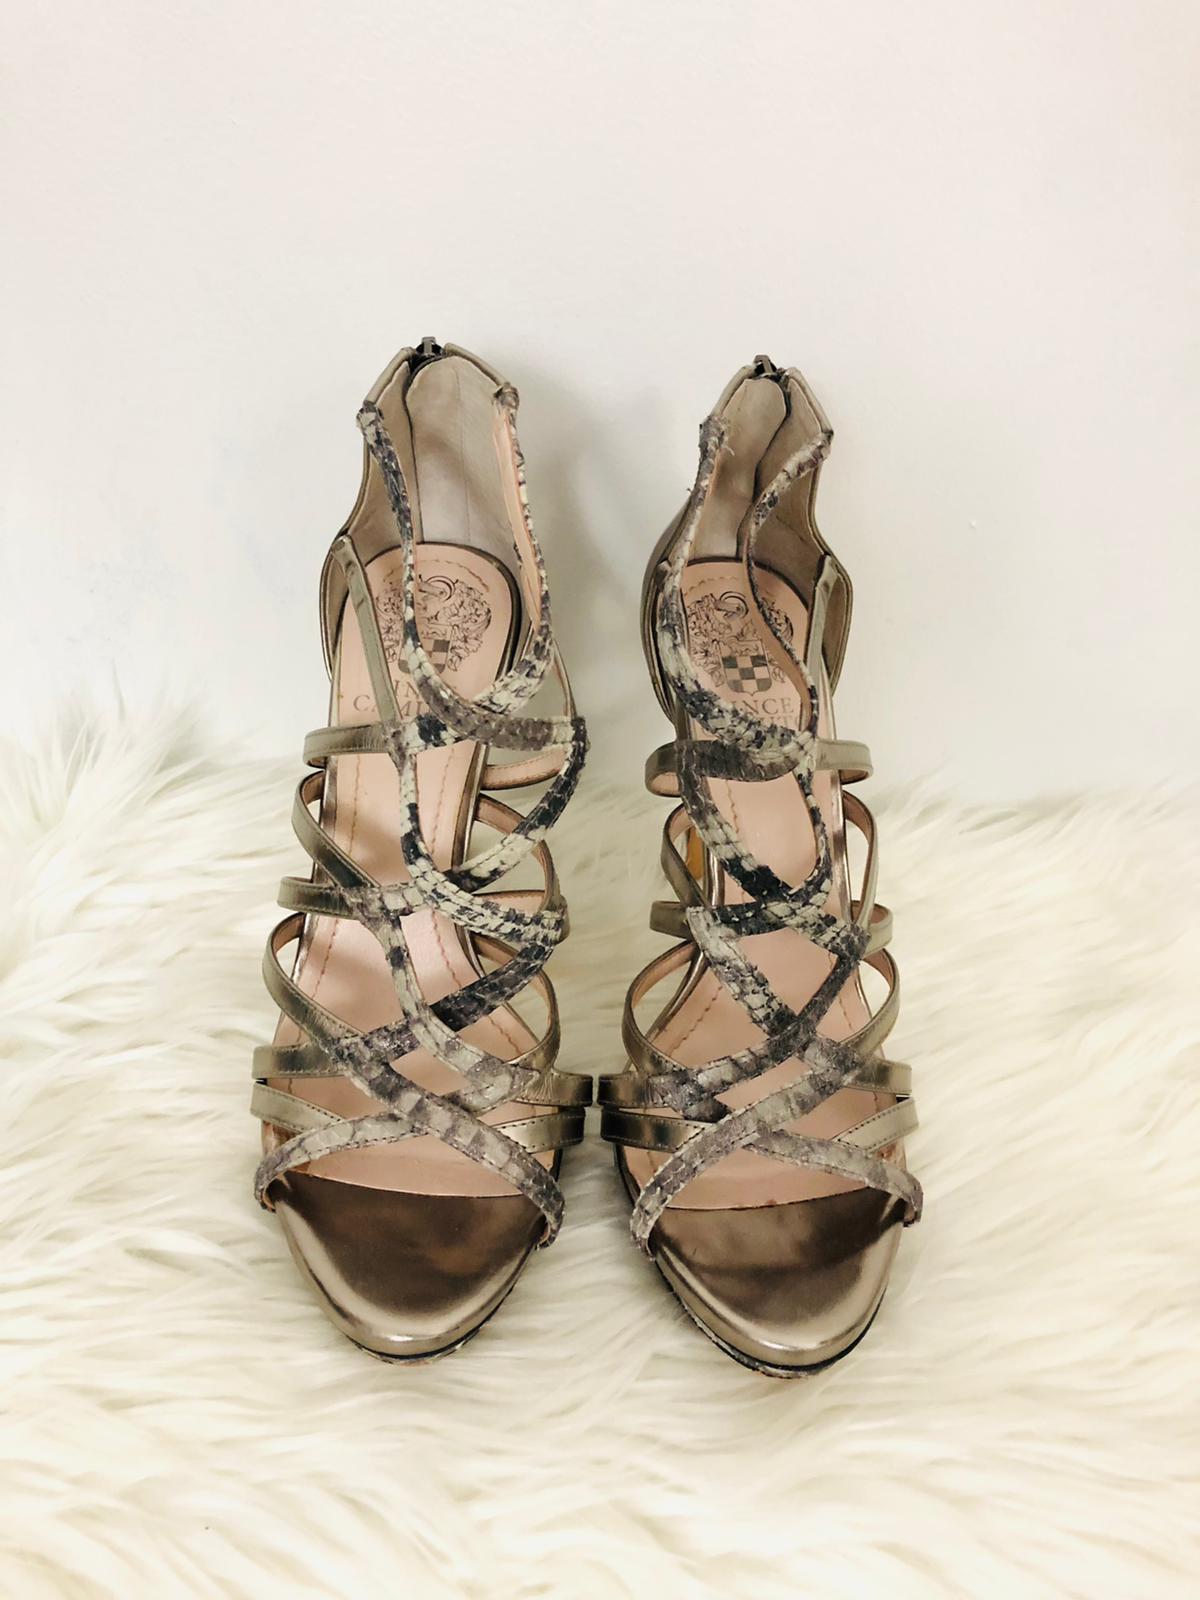 Vince Camuto Strappy Heels 6.5